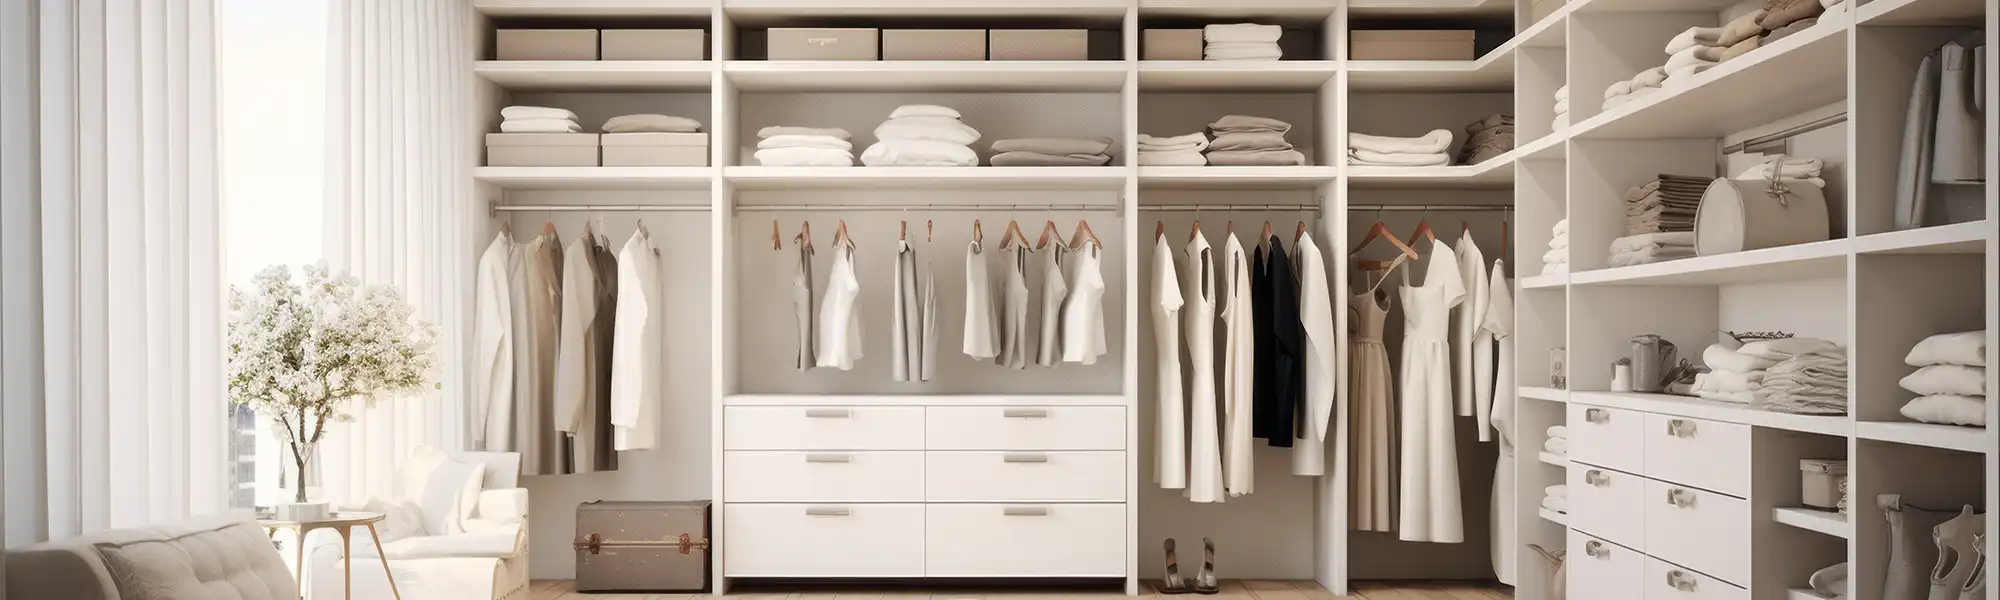 Custom Closets in St Johns OR